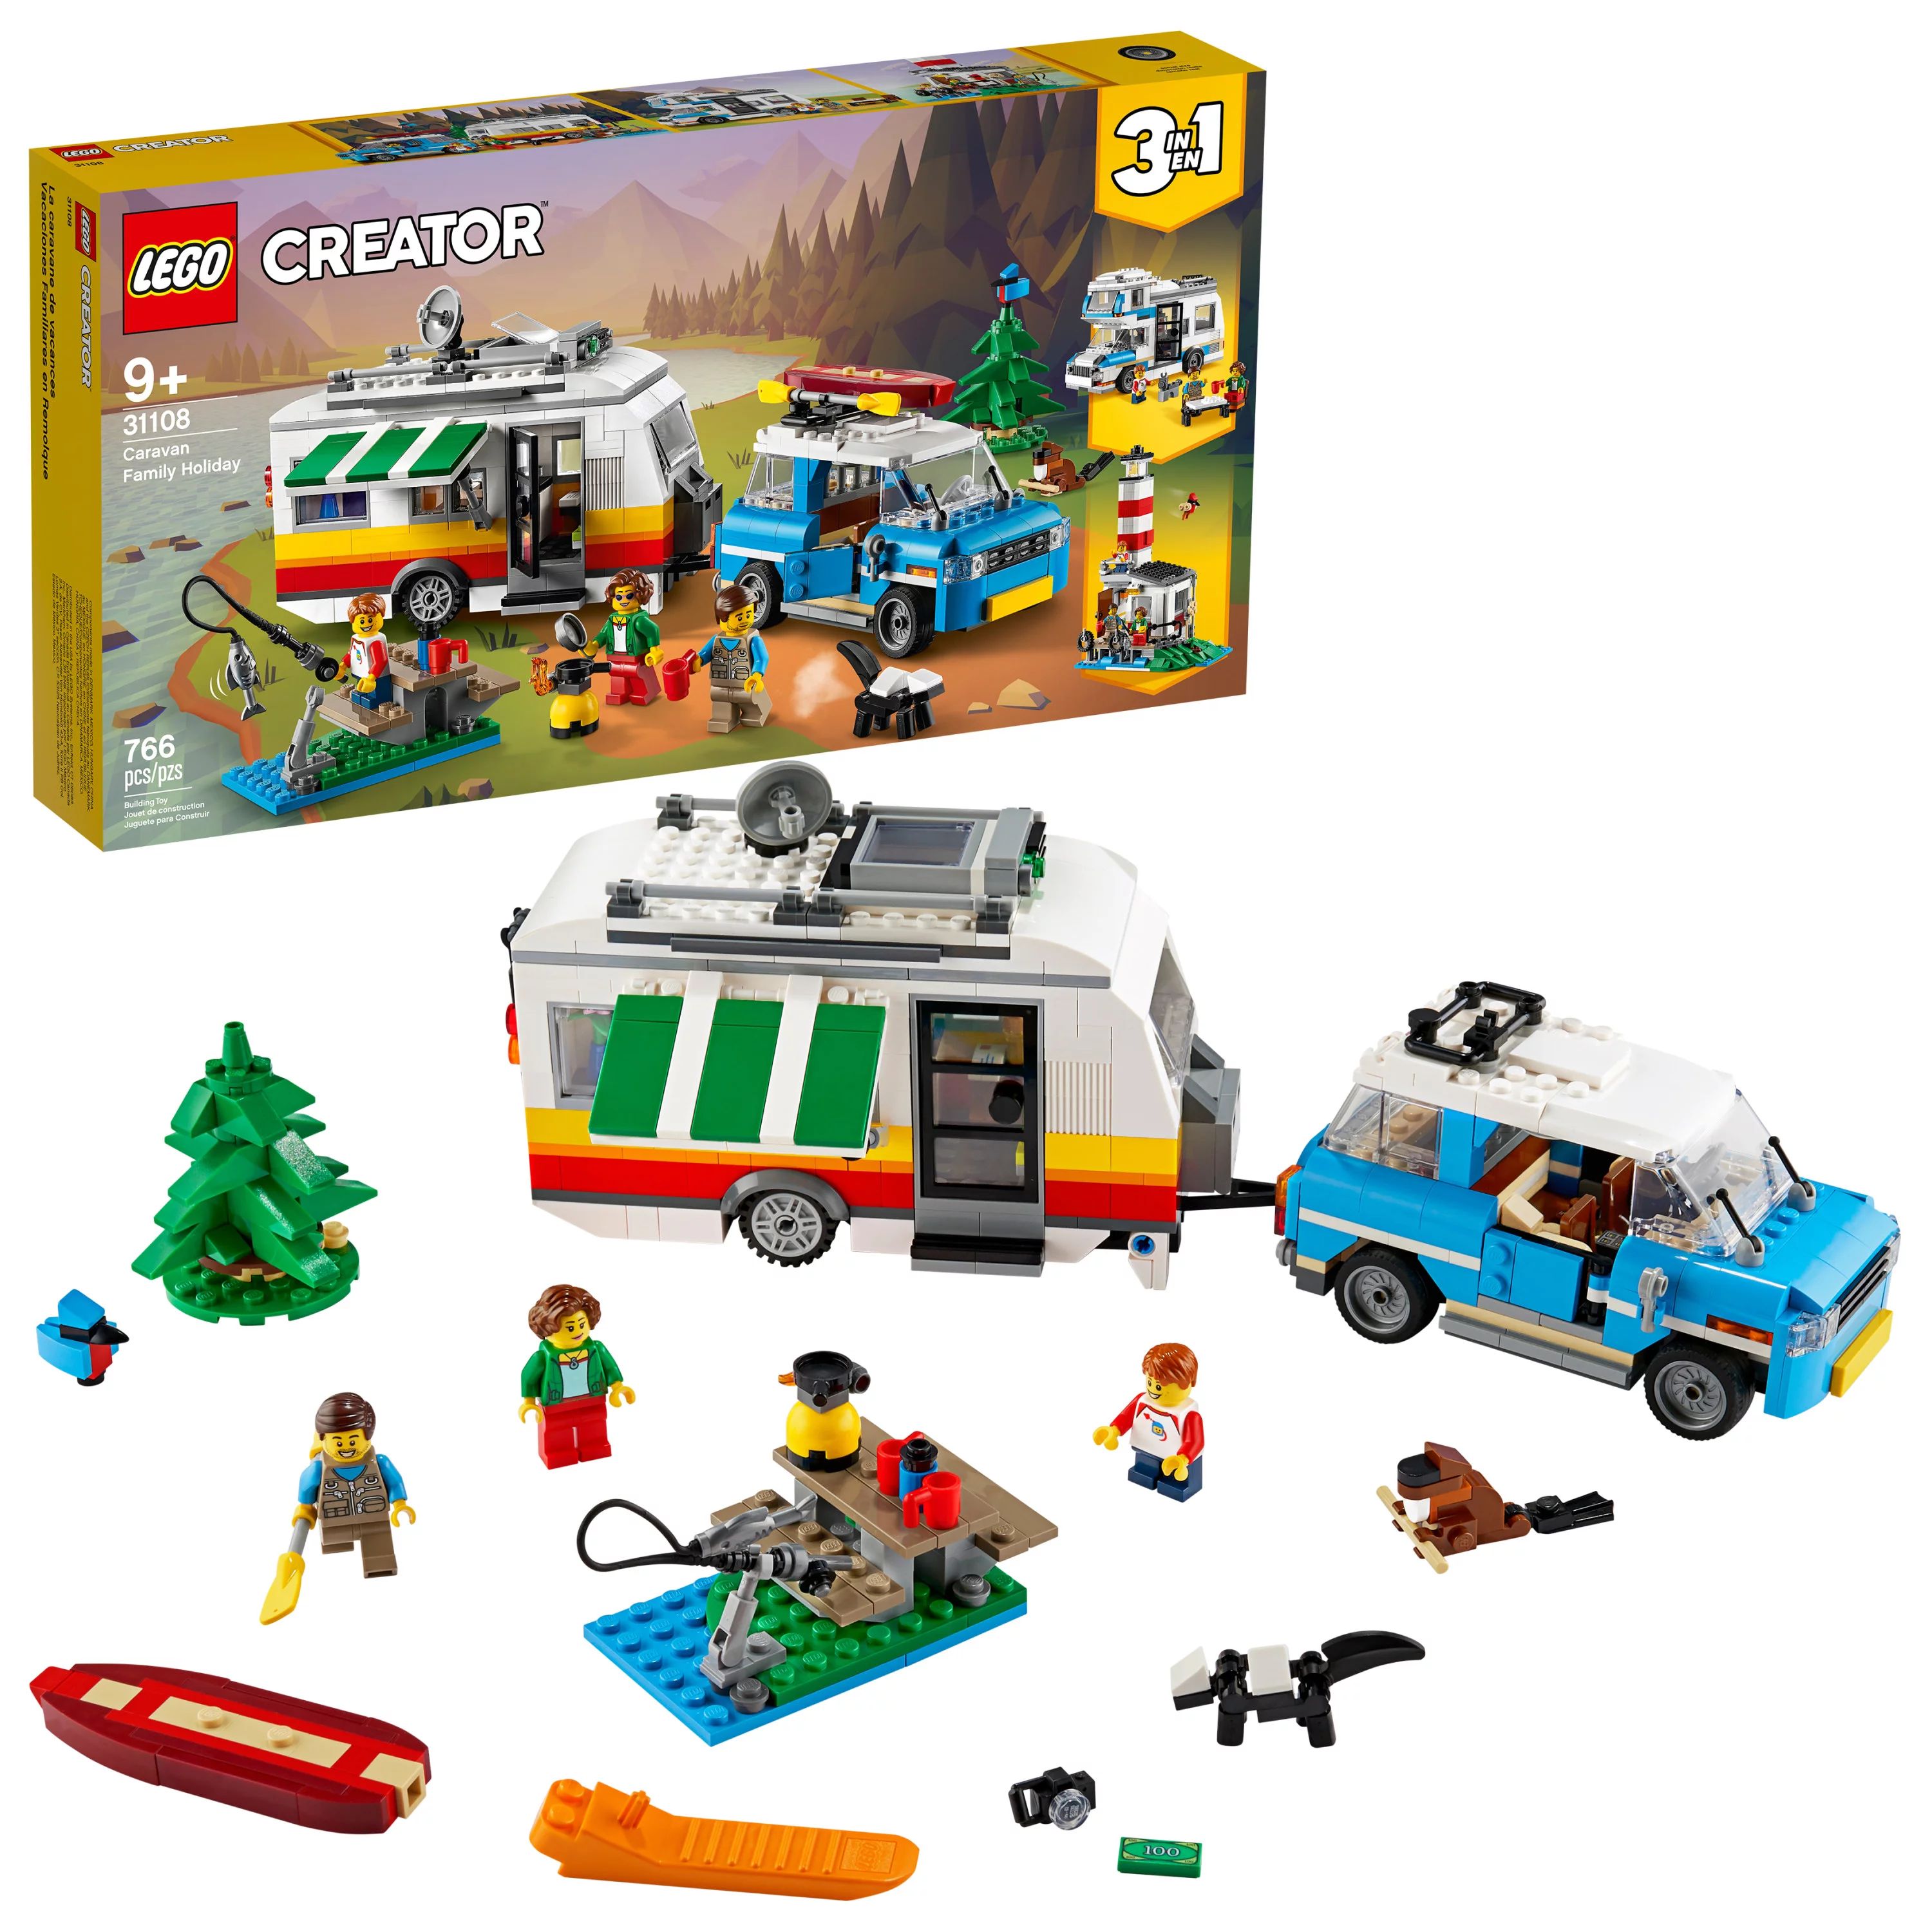 LEGO Creator 3in1 Caravan Family Holiday 31108 Creative Building Toy Set for Kids Ages 9+ (766 Pi... | Walmart (US)